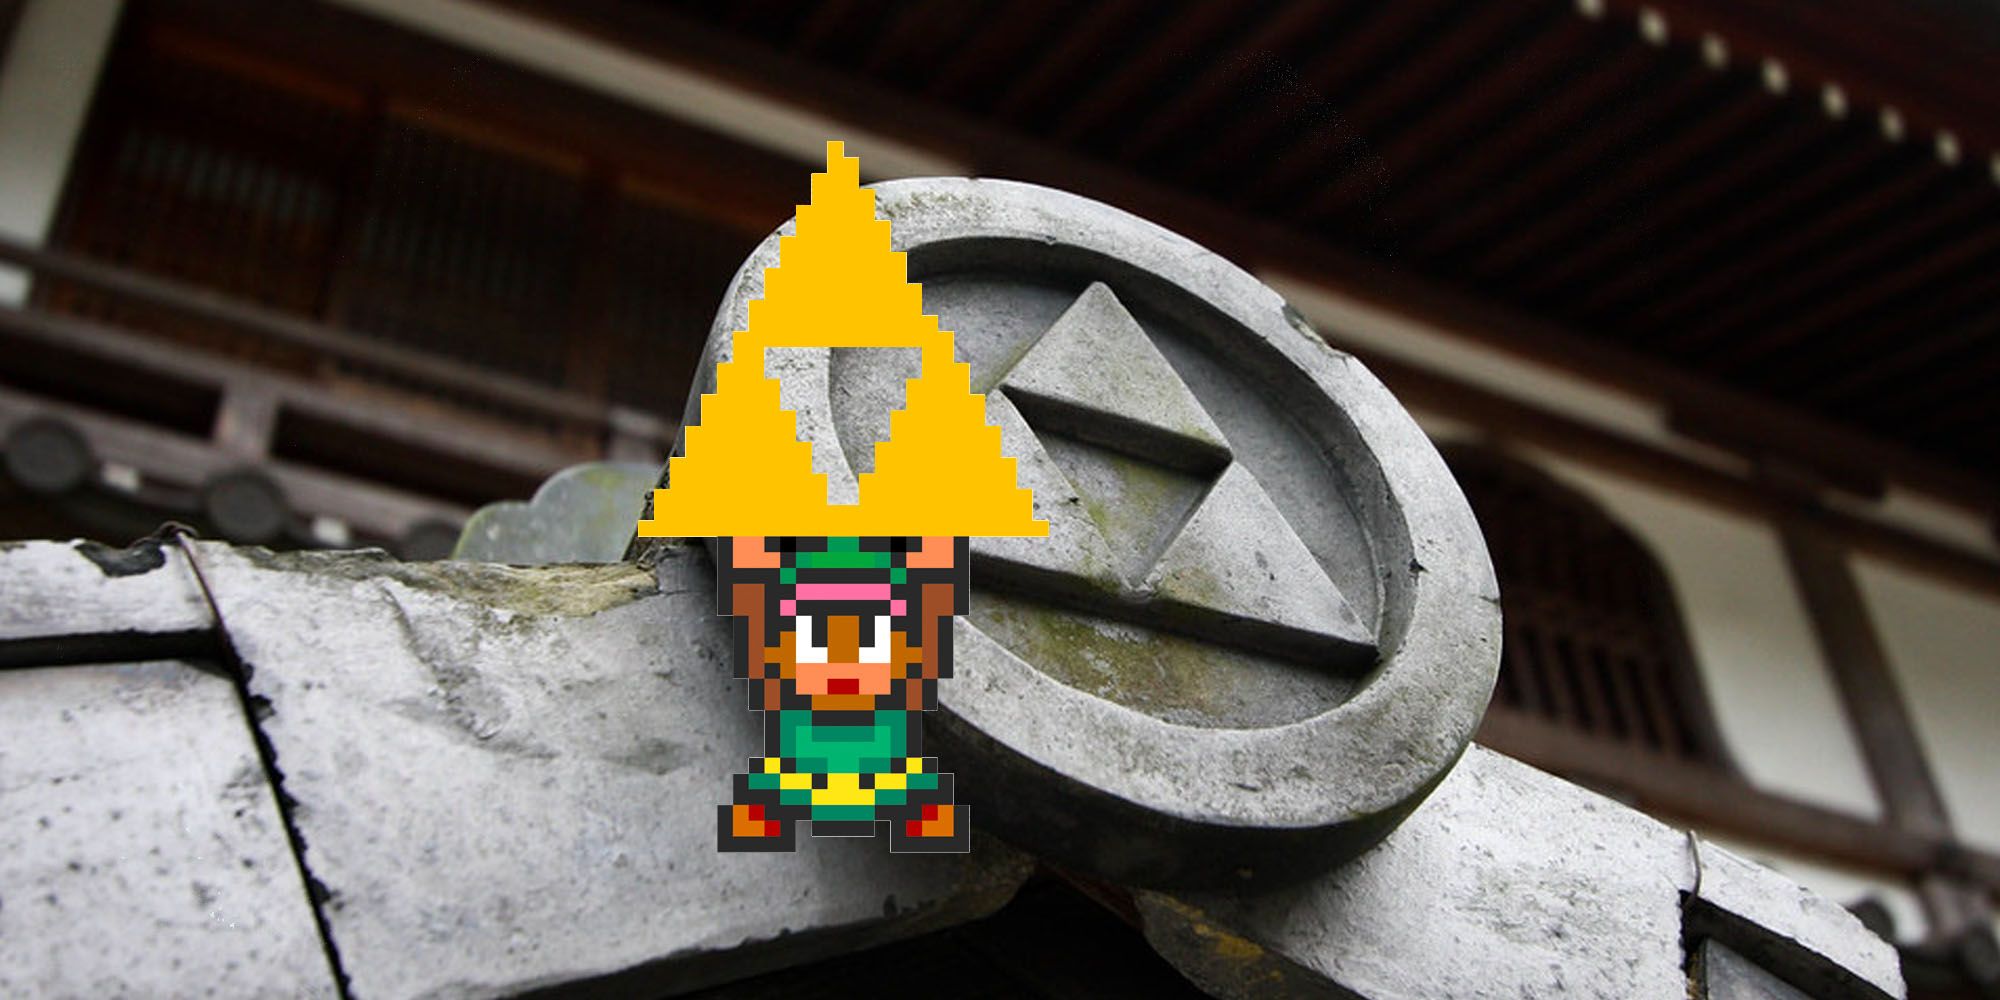 Legend of Zelda Real World History of the Triforce